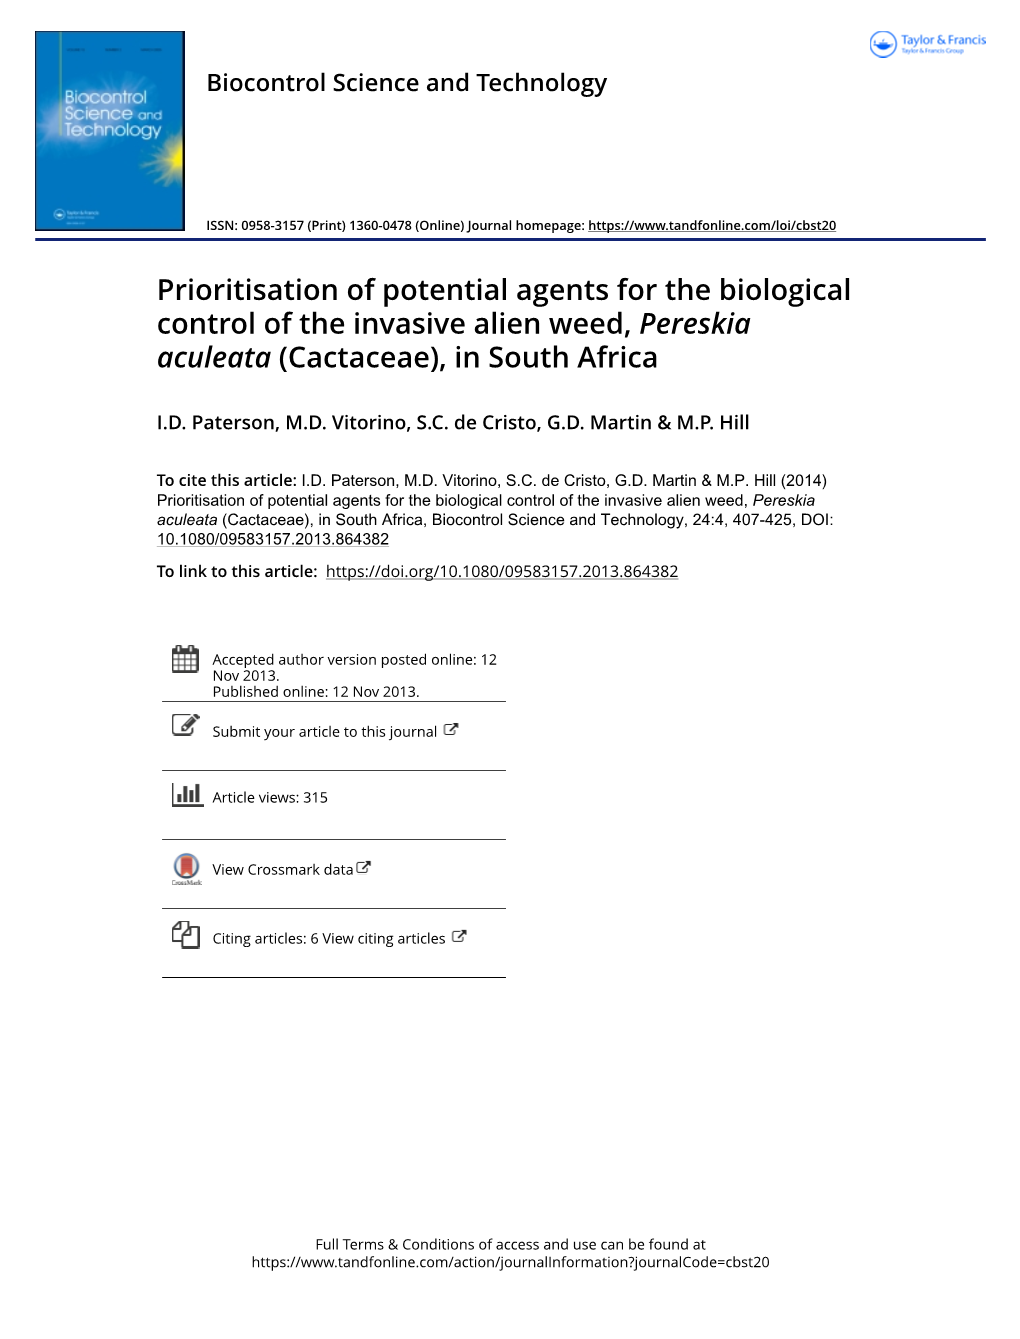 Prioritisation of Potential Agents for the Biological Control of the Invasive Alien Weed, Pereskia Aculeata (Cactaceae), in South Africa